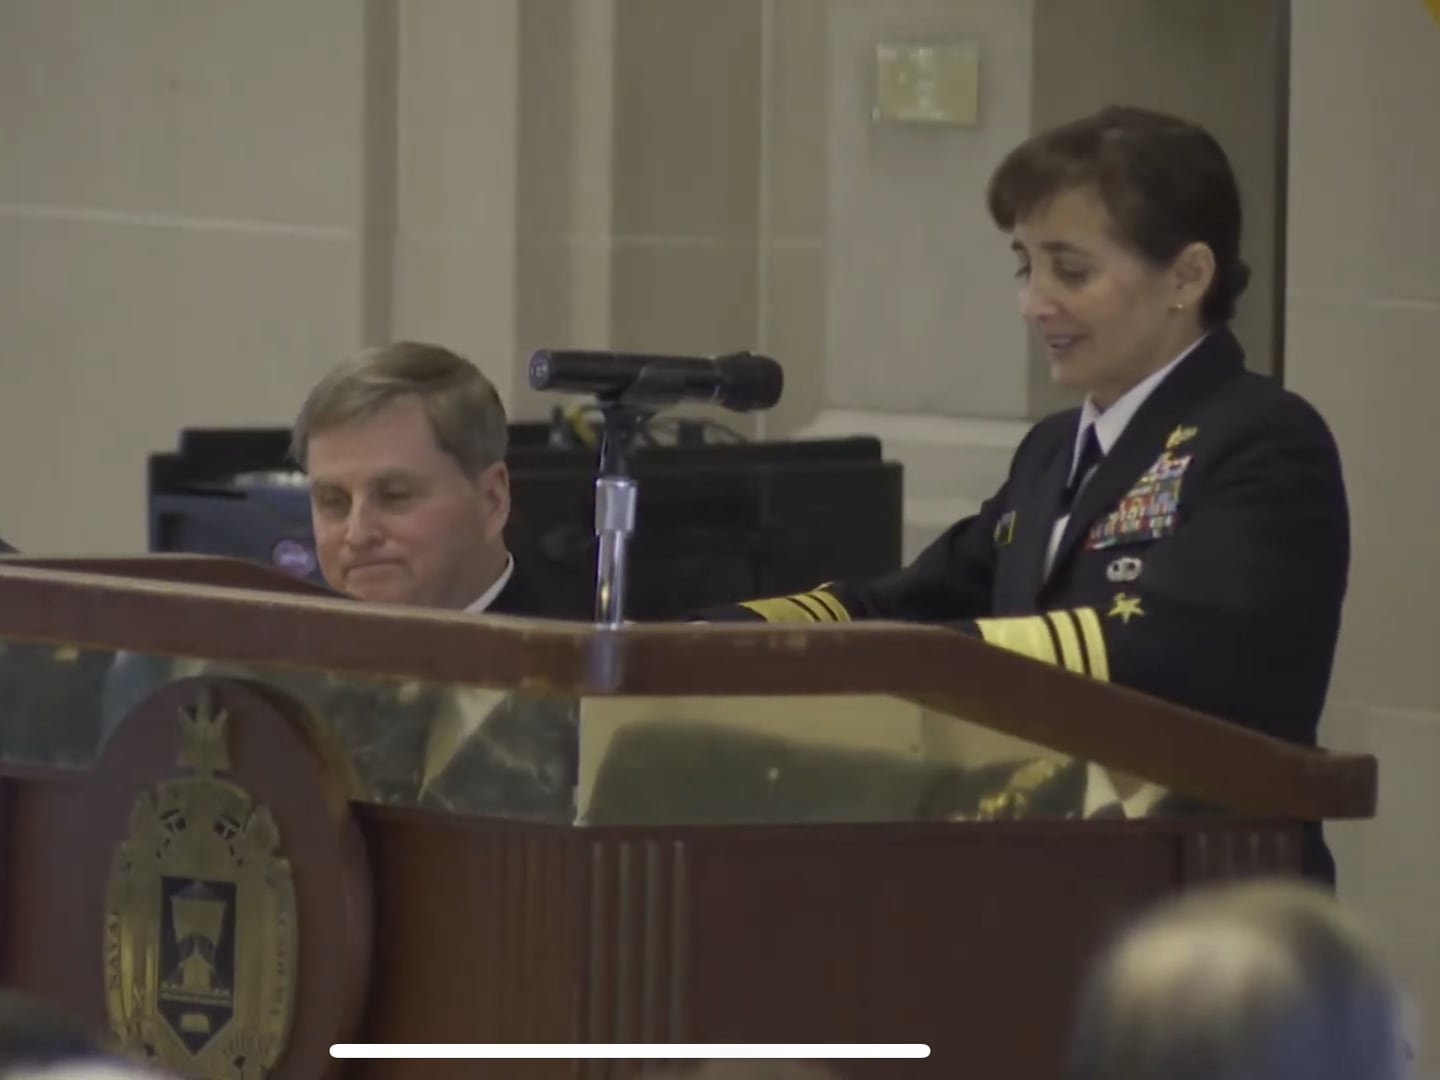 Vice Admiral Yvette Davids addressed an audience at a change of command ceremony at the U.S. Naval Academy on Jan. 11, 2023. To her left is Rear Adm. Fred Kacher, who served as interim superintendent.